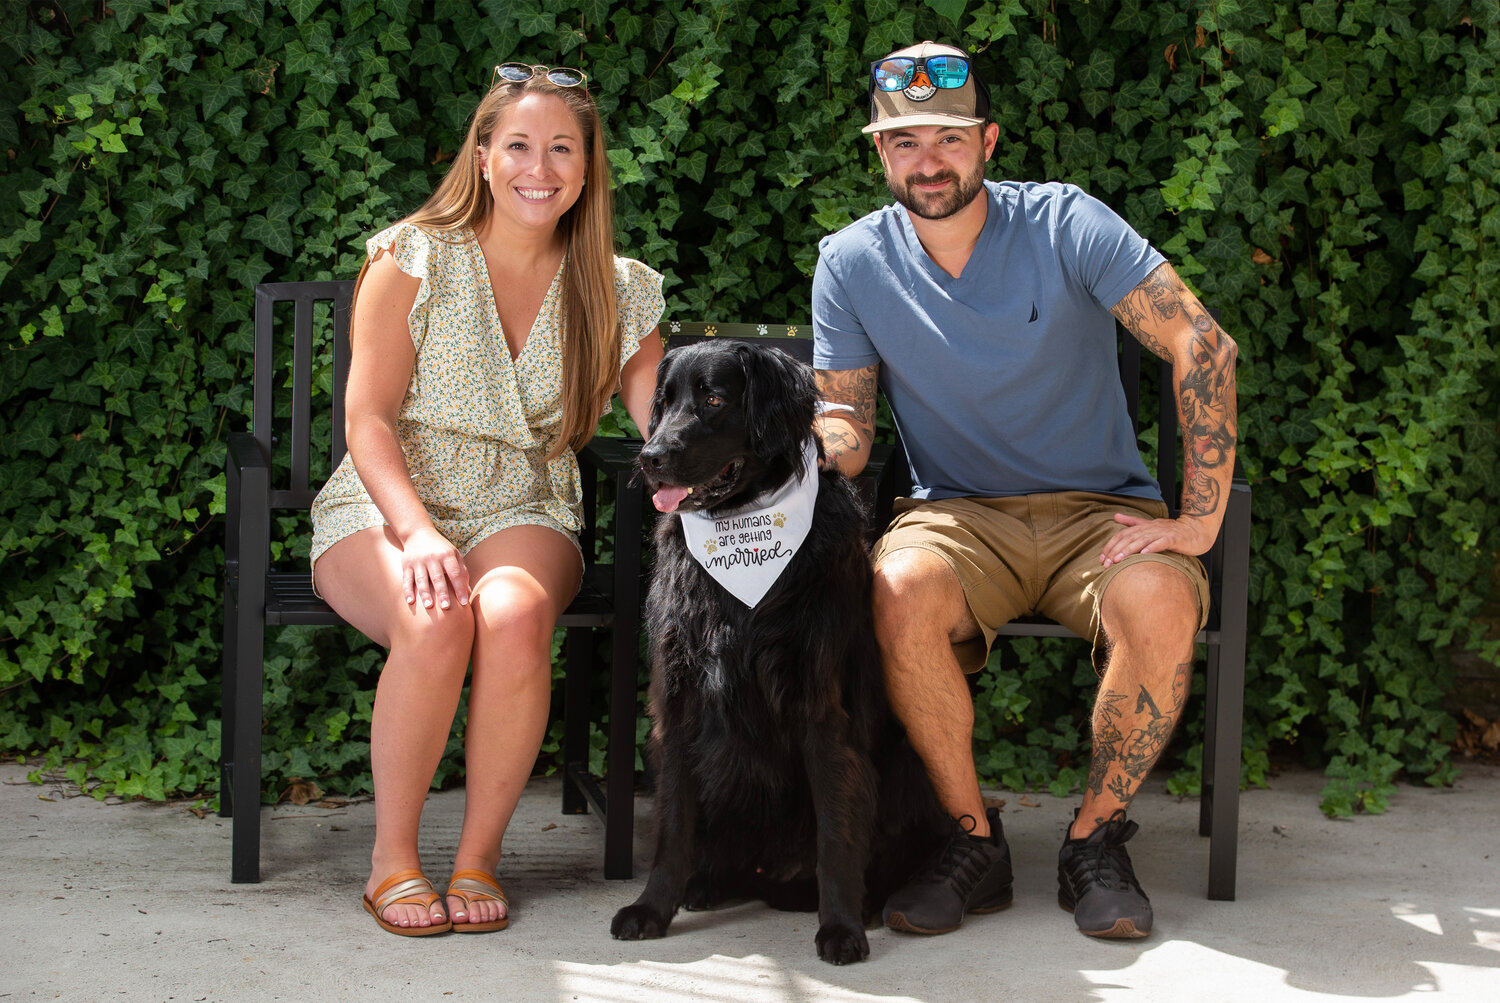 Lops Brewing welcomes friendly dogs